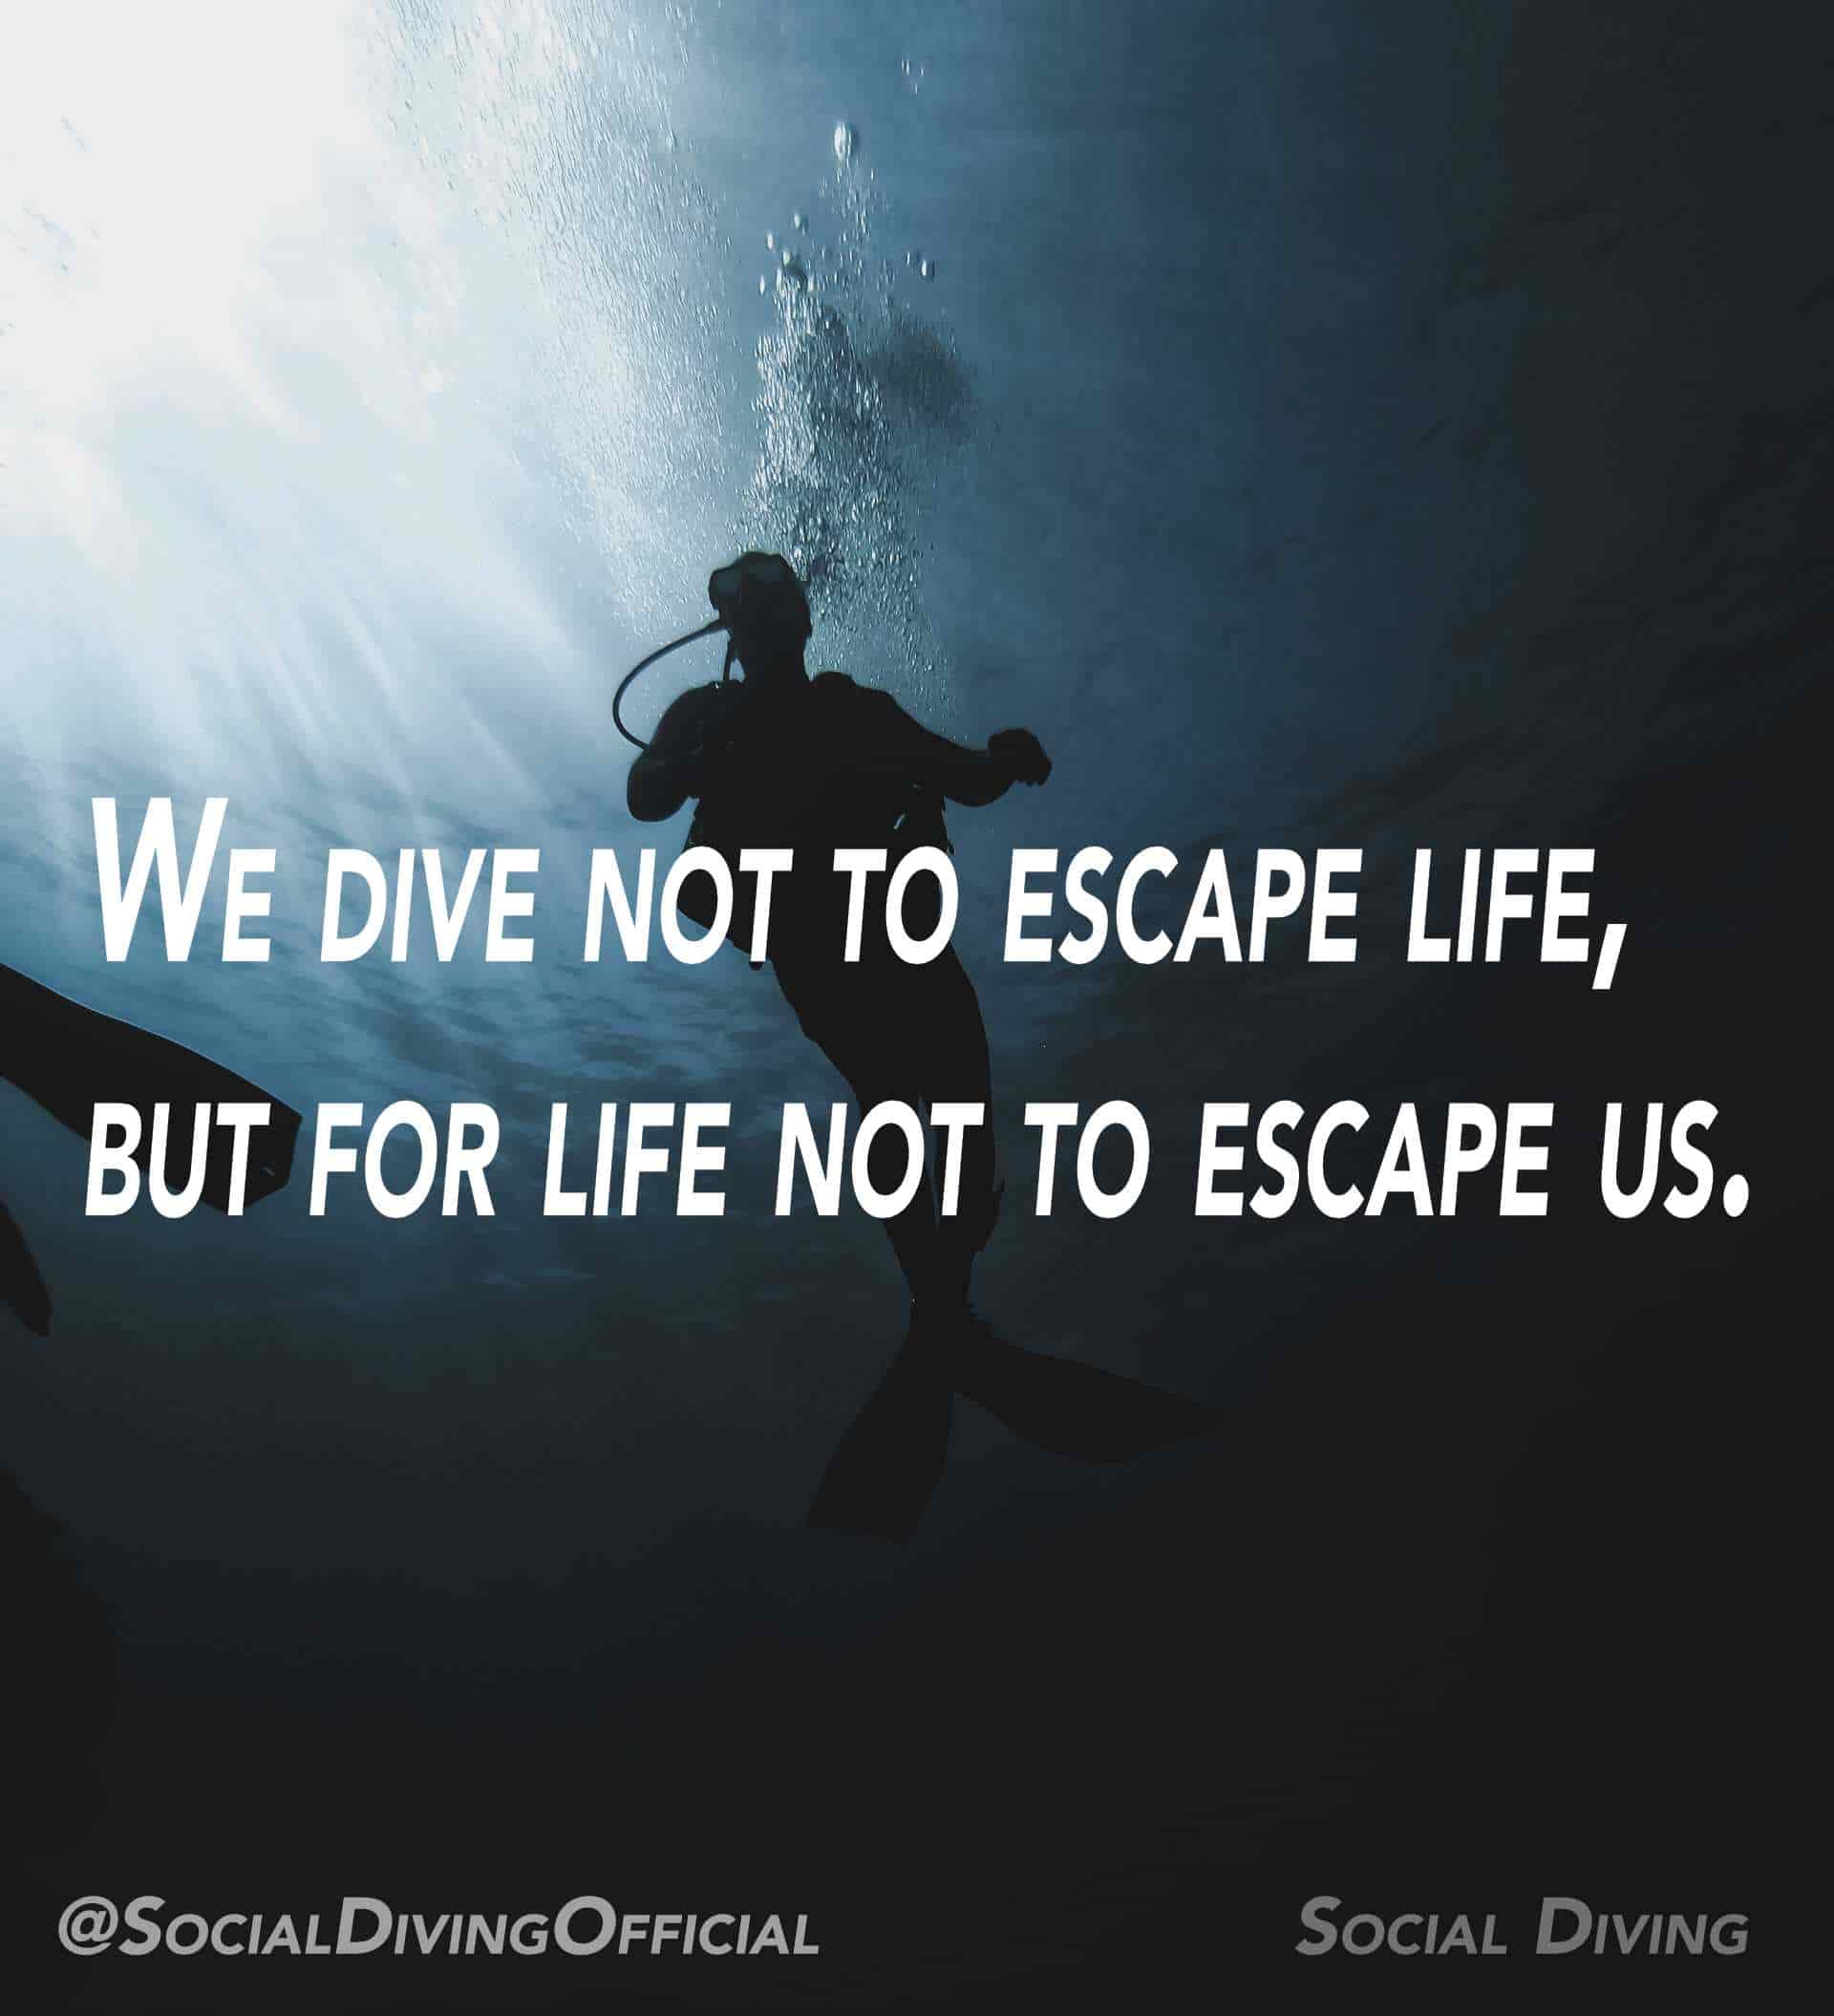 The 100 best diving quotes - Social Diving